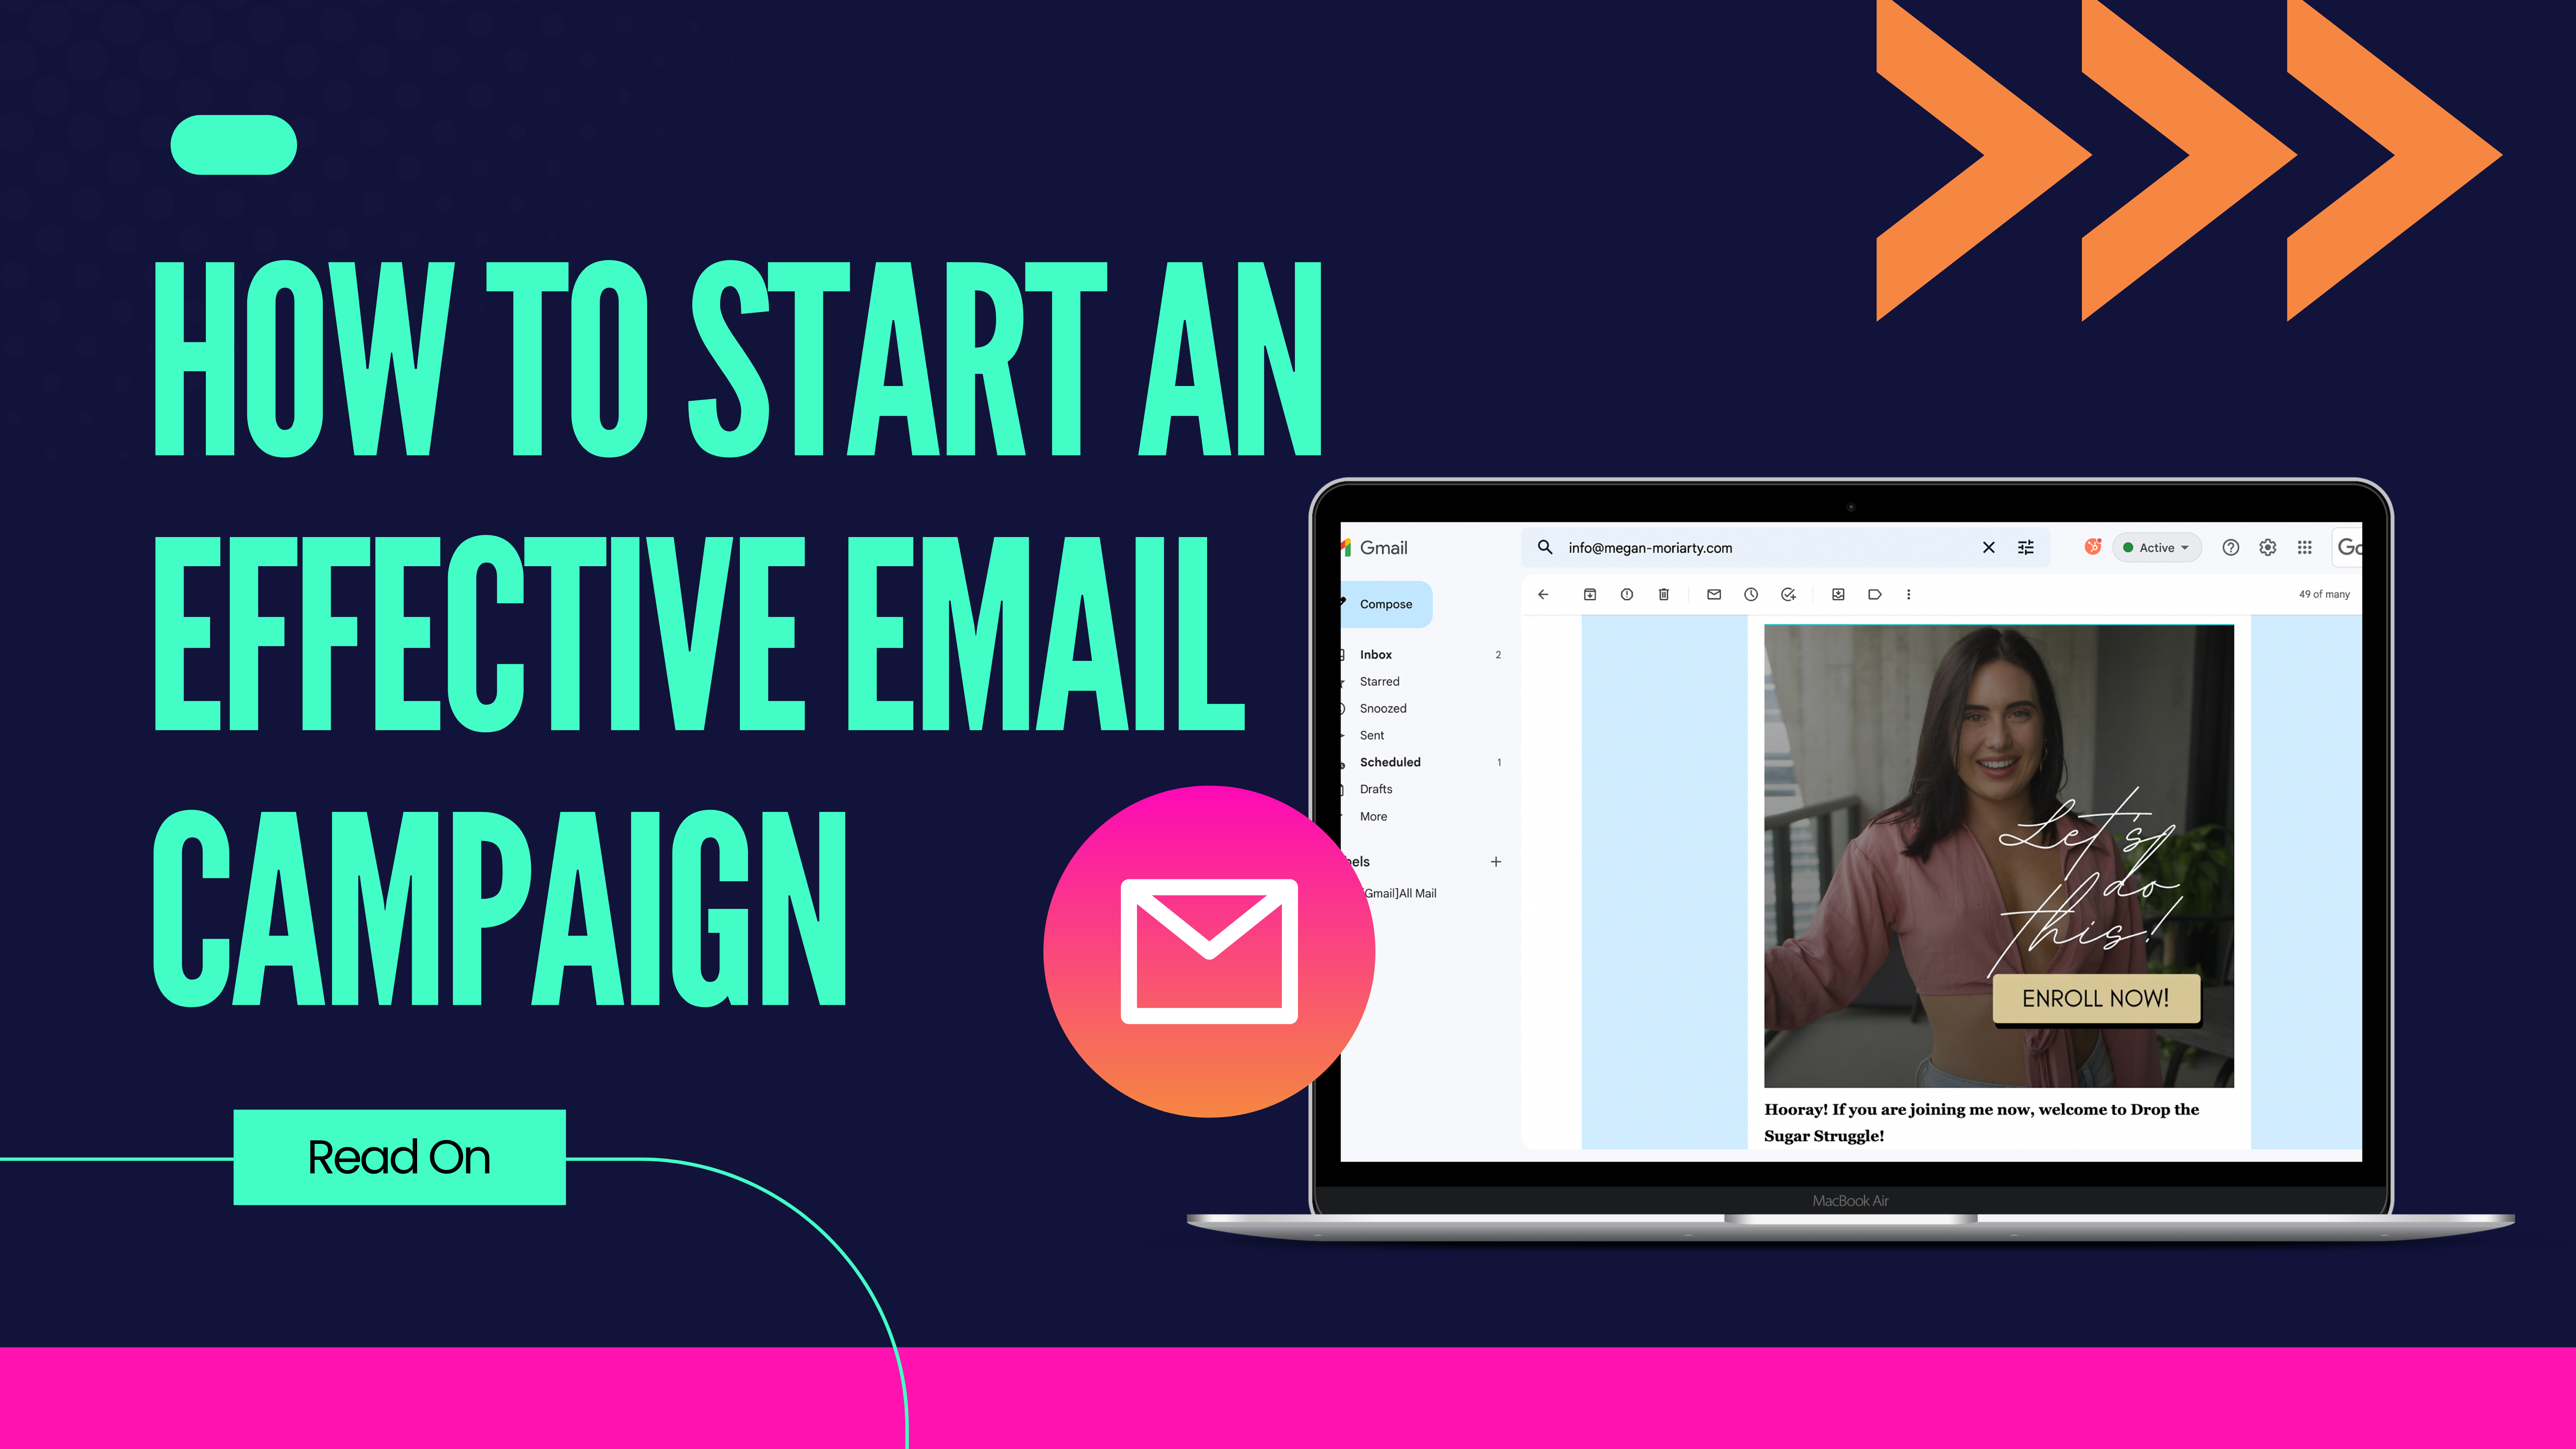 How to Start an Effective Email Campaign